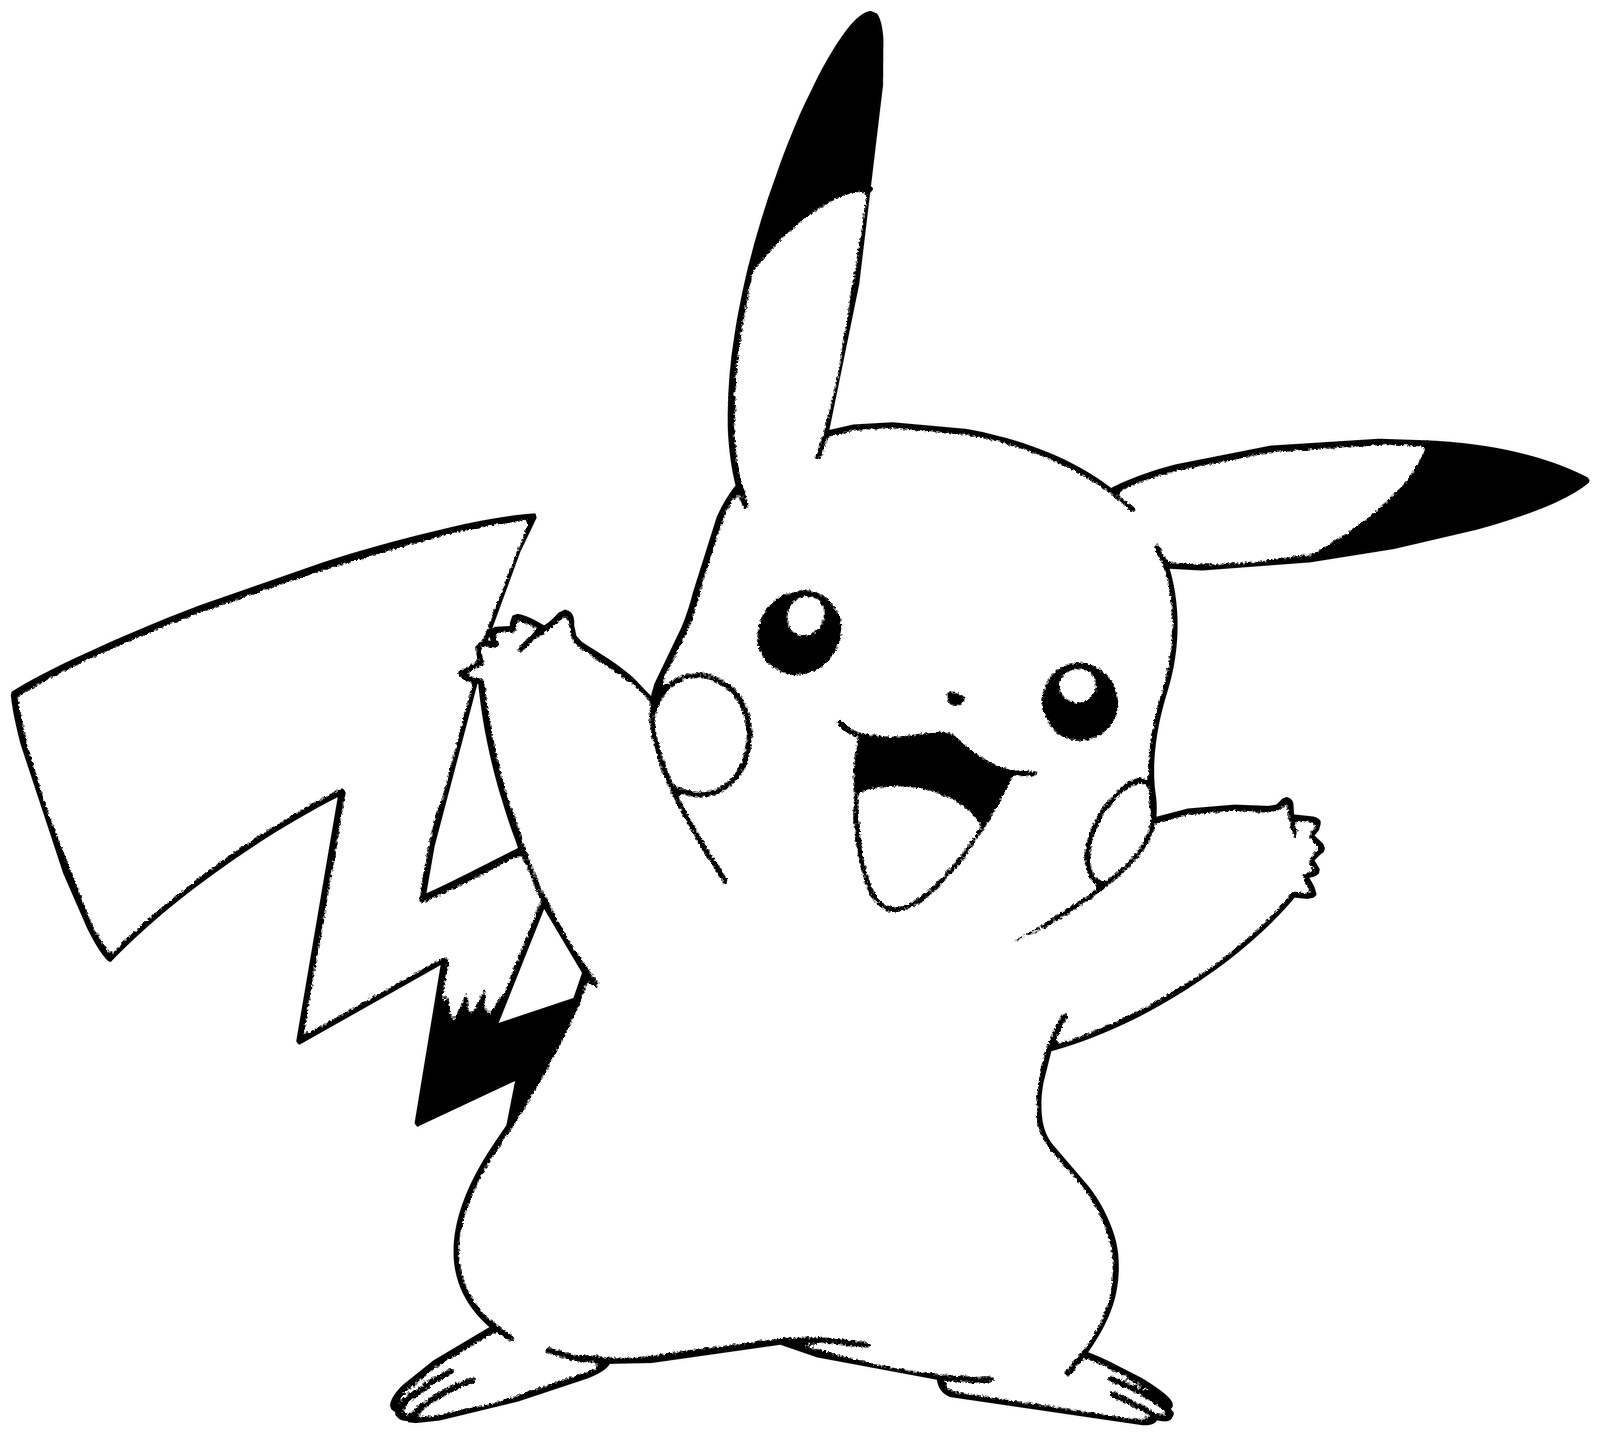 Pikachu cheering coloring page